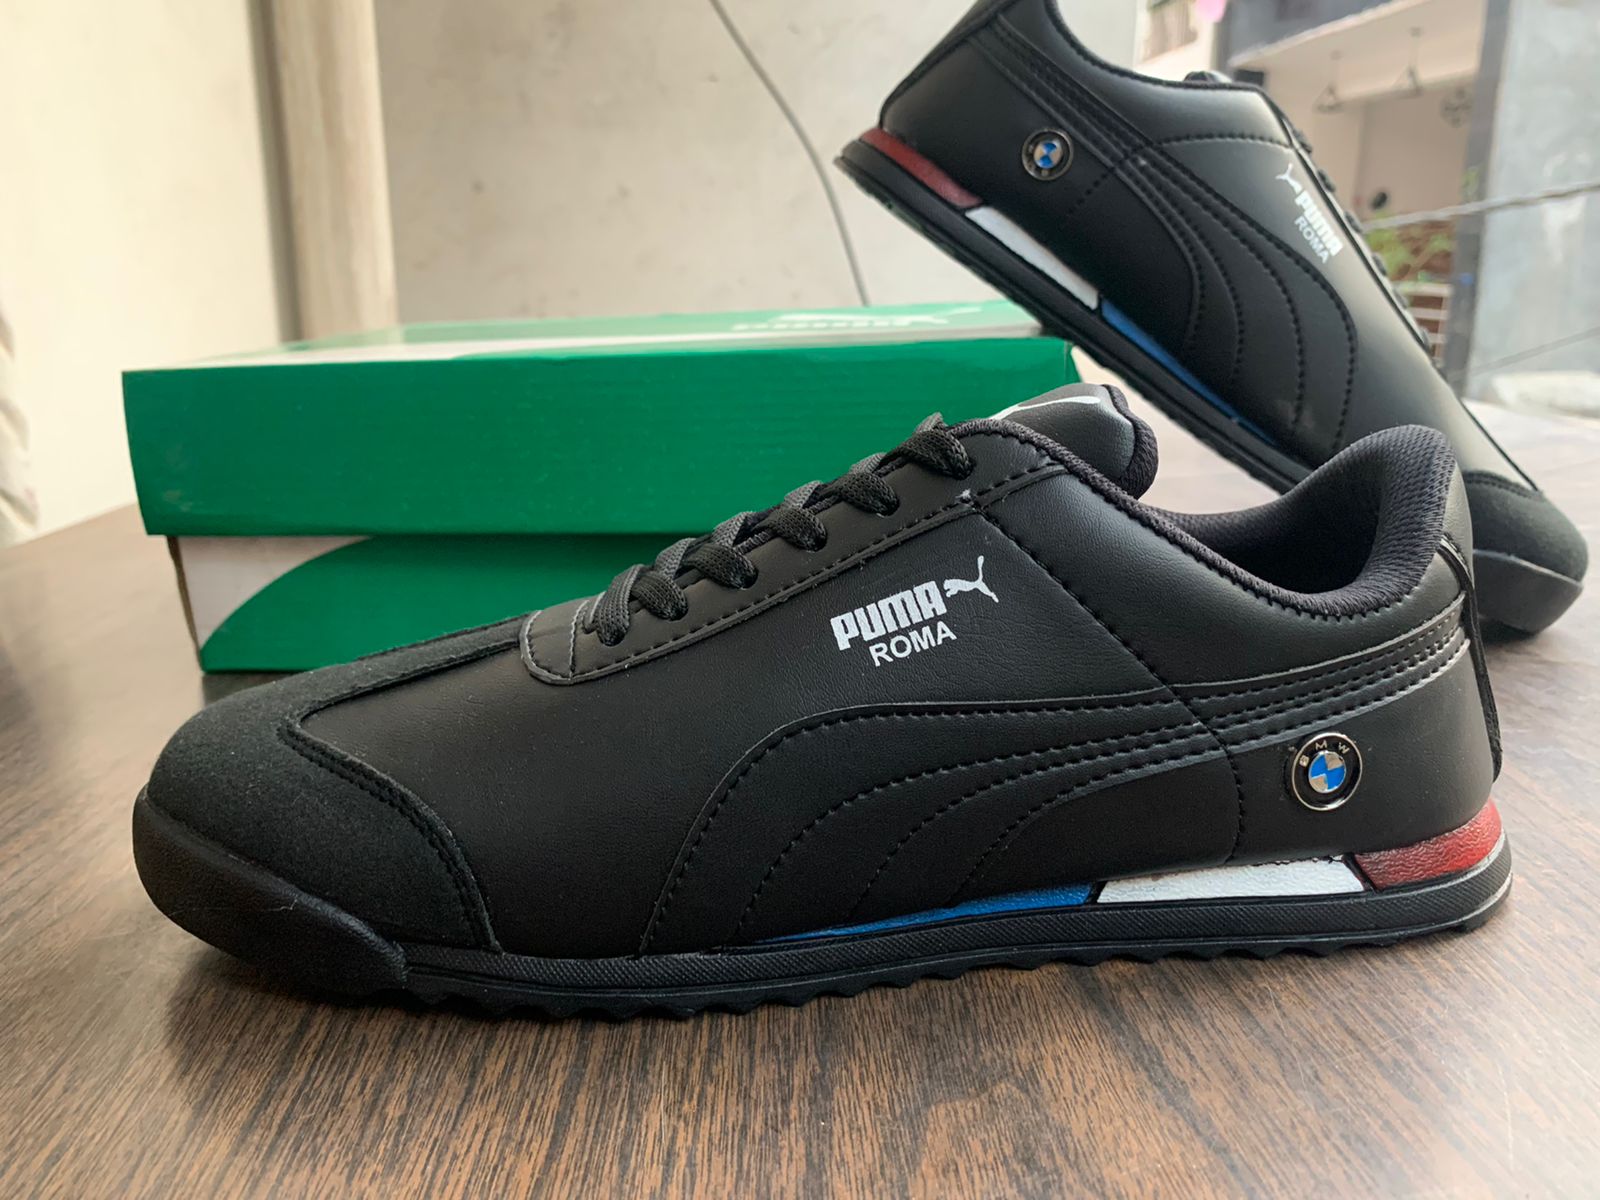 Shop Puma roma bmw copy shoes-5A quality - shoeseller.in